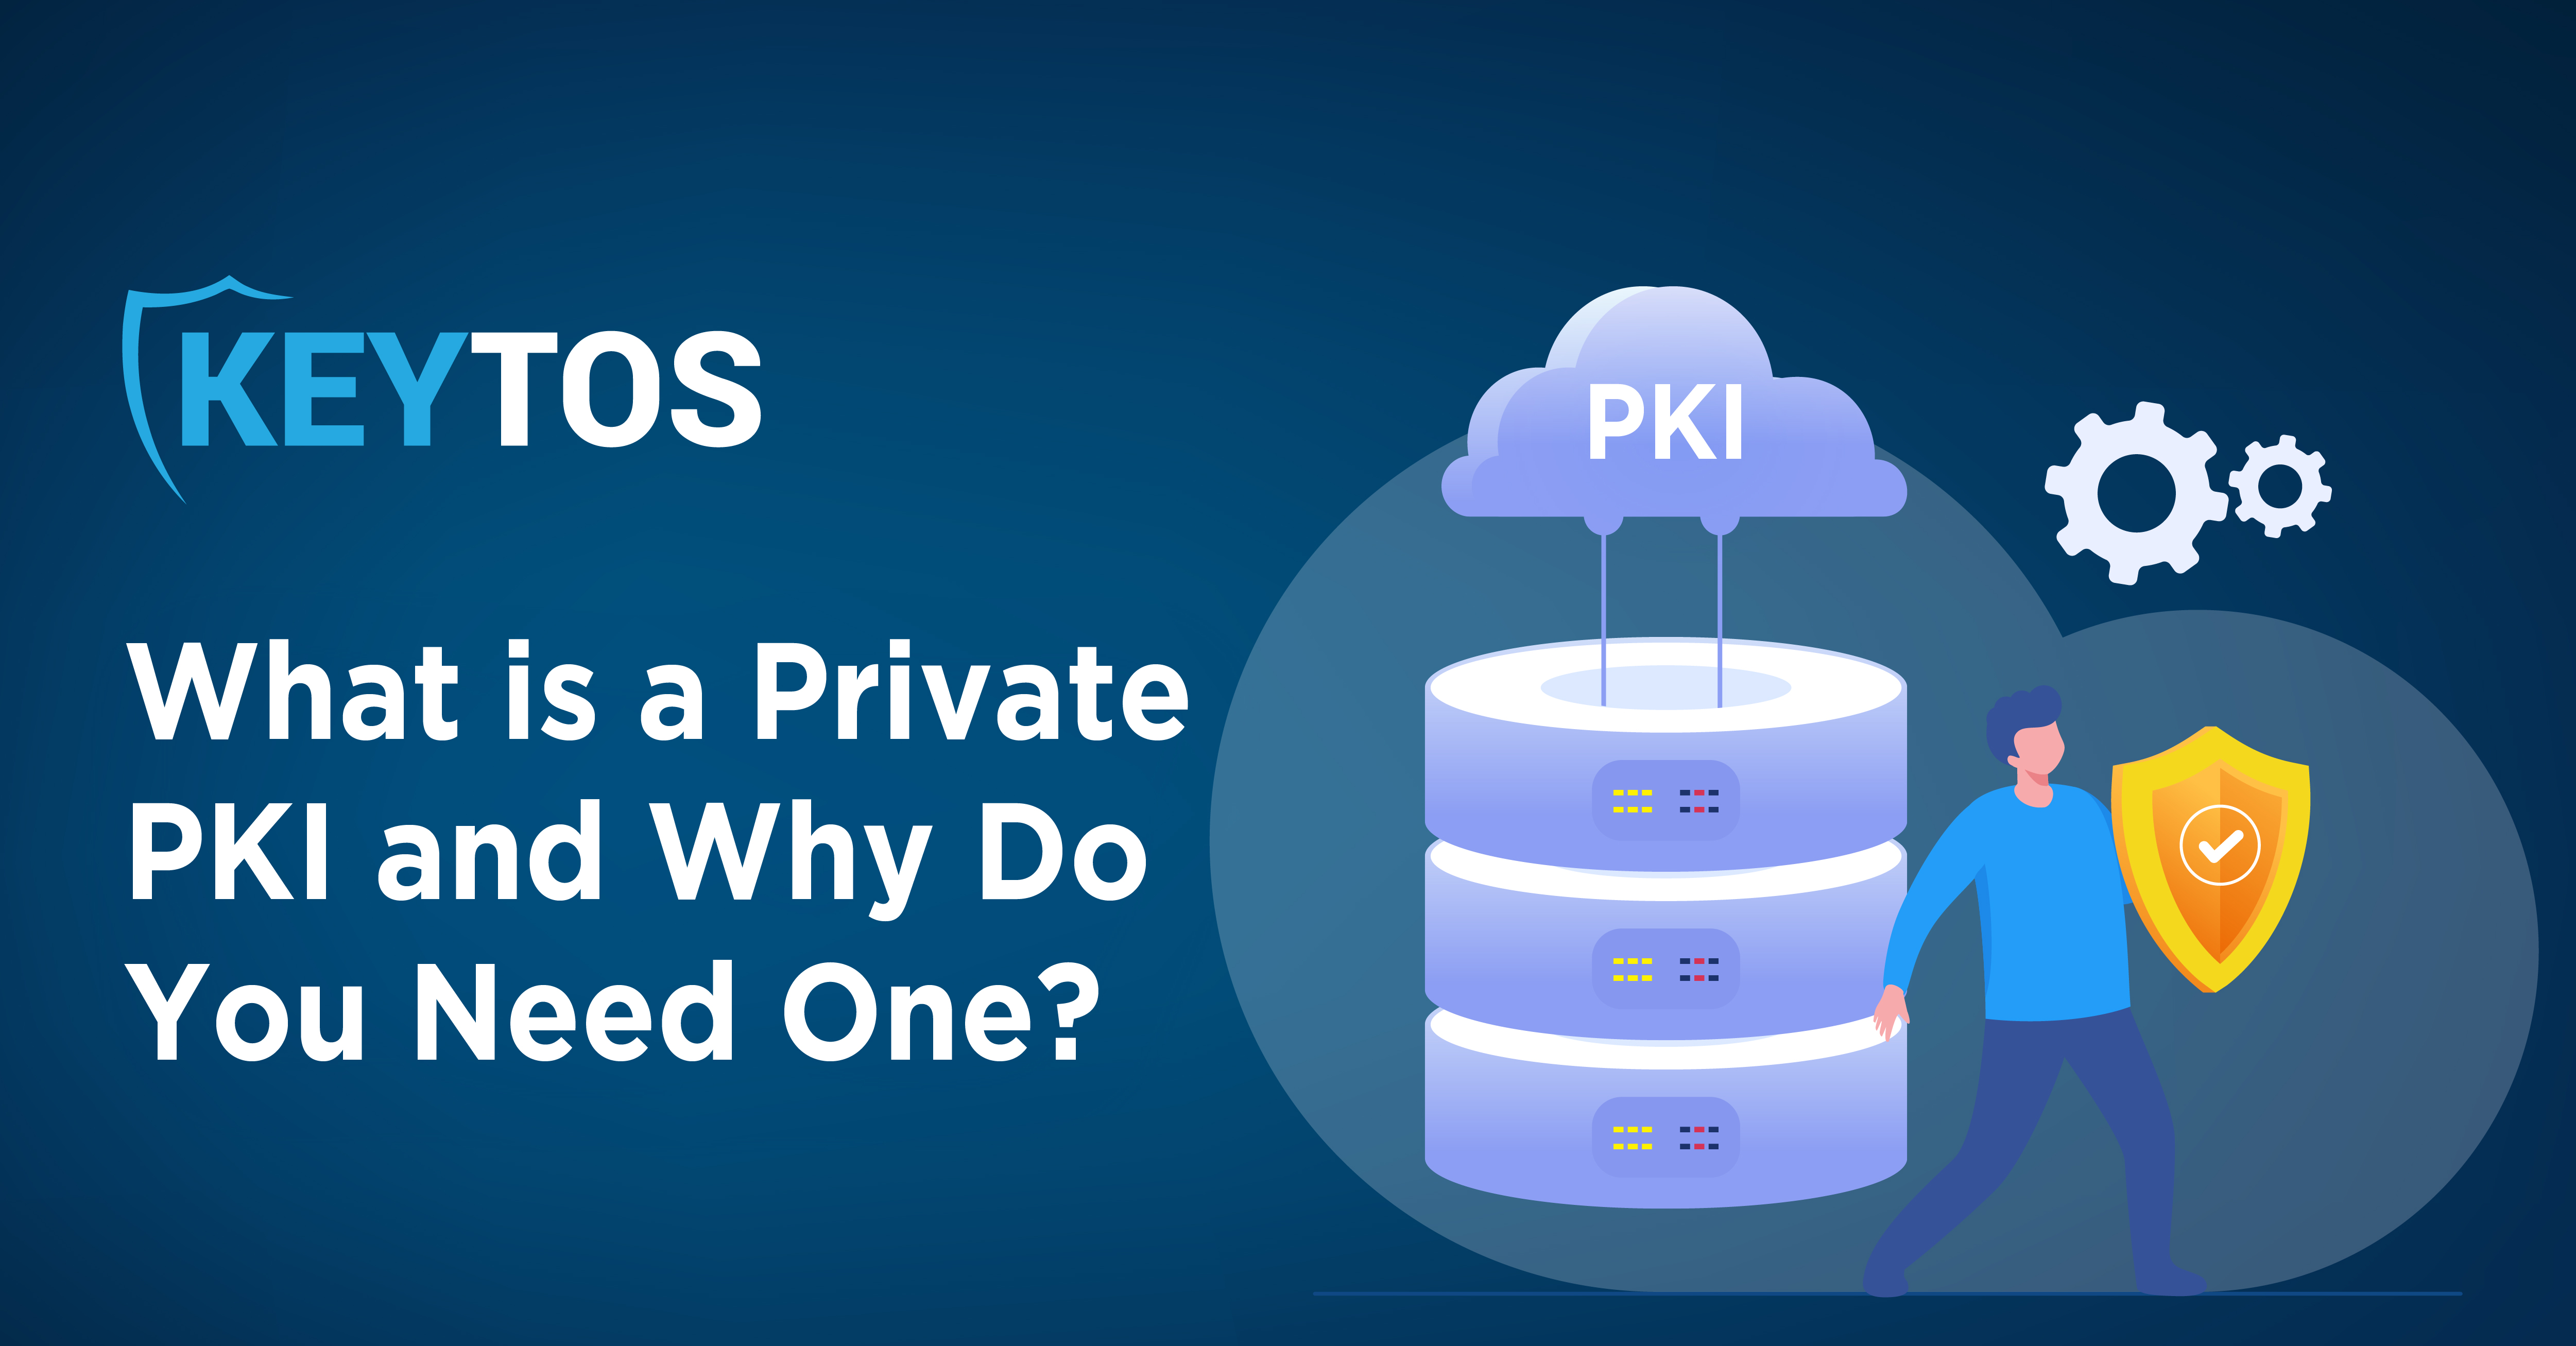 What is a Private PKI and Why Do You Need One?